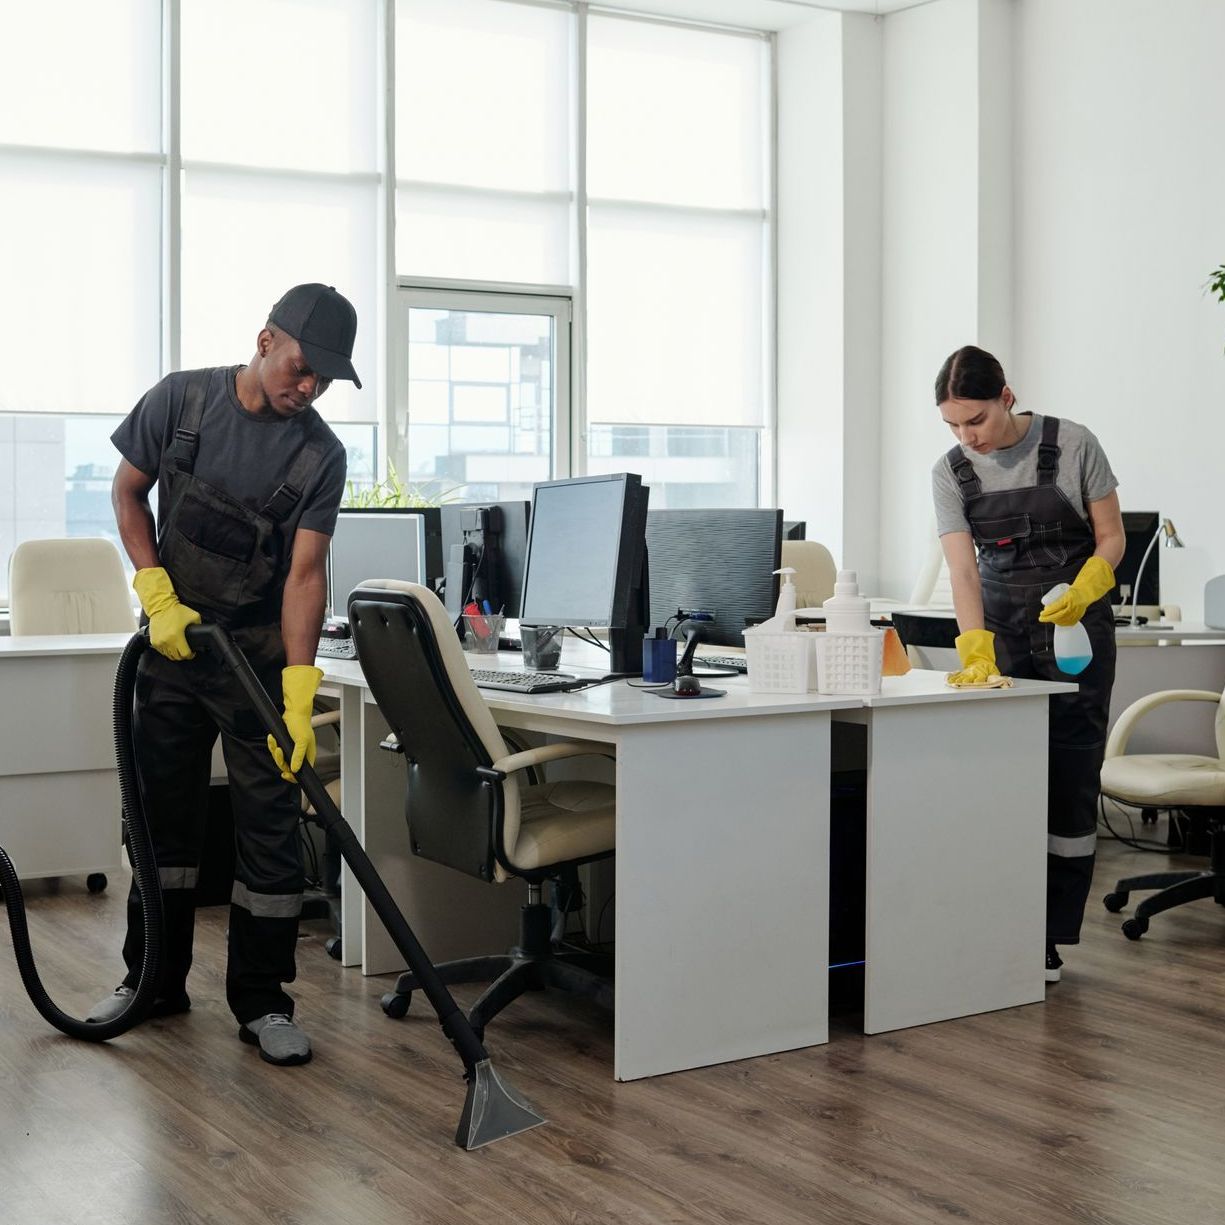 a man and a woman are cleaning an office with a vacuum cleaner .